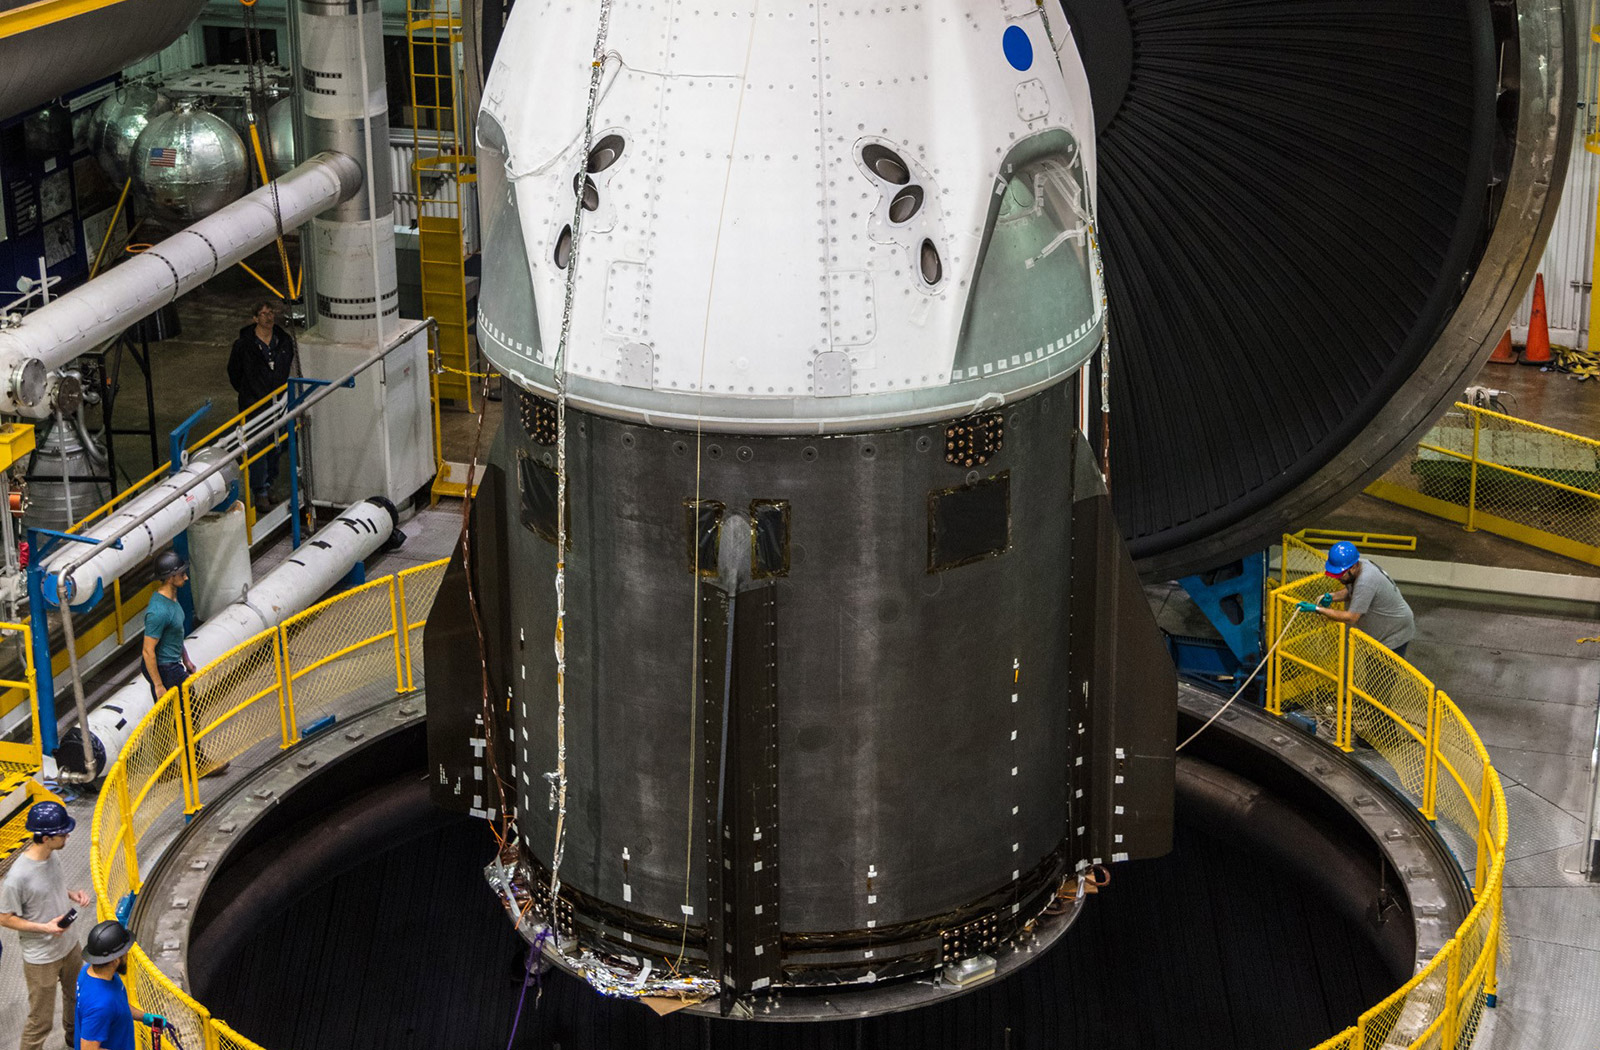 SpaceX Crew Dragon Modules thermal vacuum and acoustic testing.